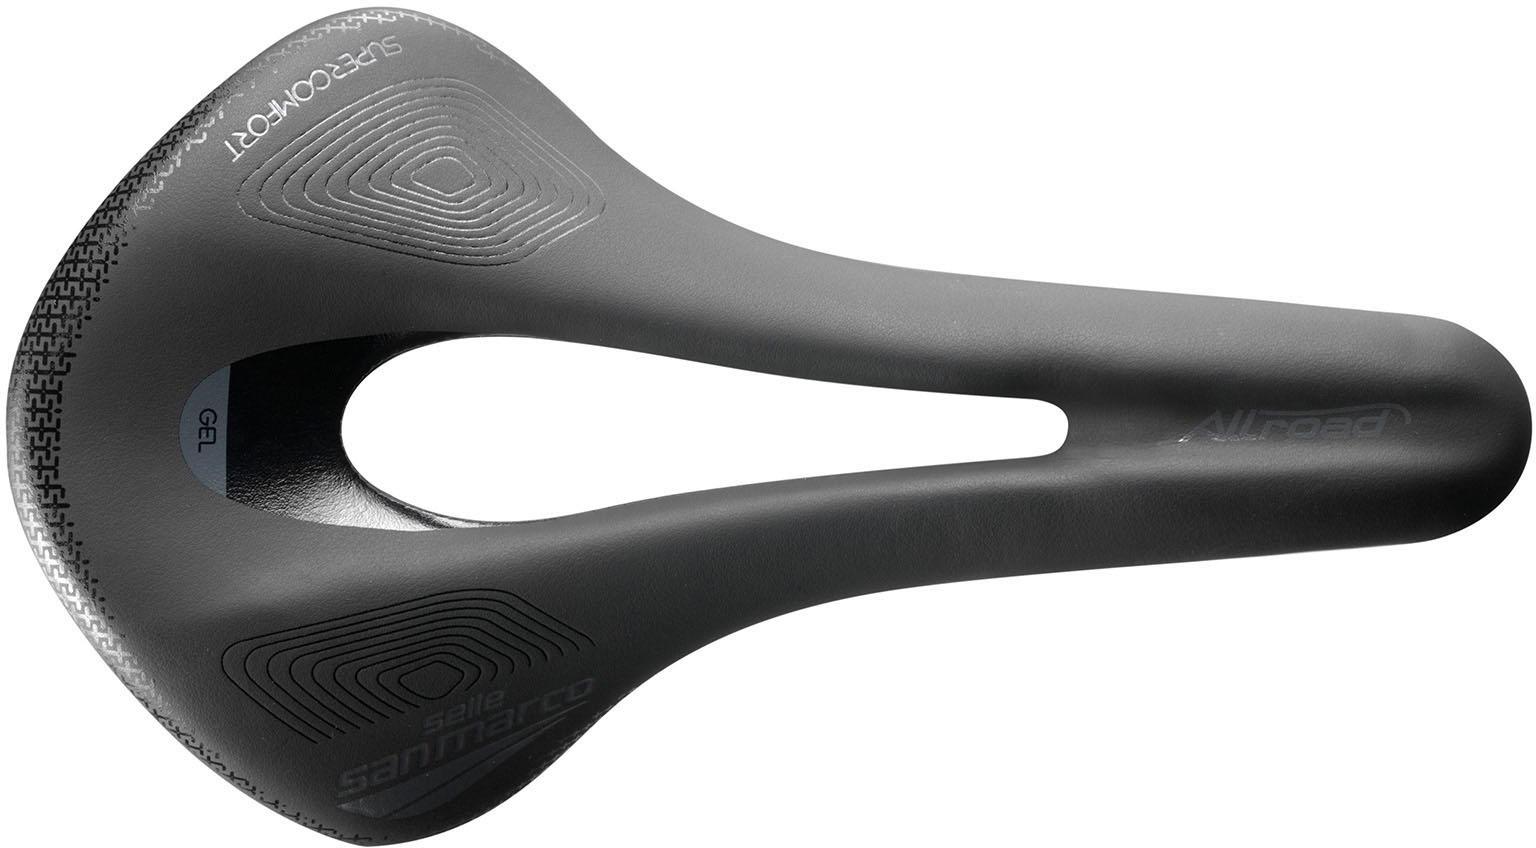 Selle San Marco Allroad Open-fit Supercomfort Racing Saddle - Black